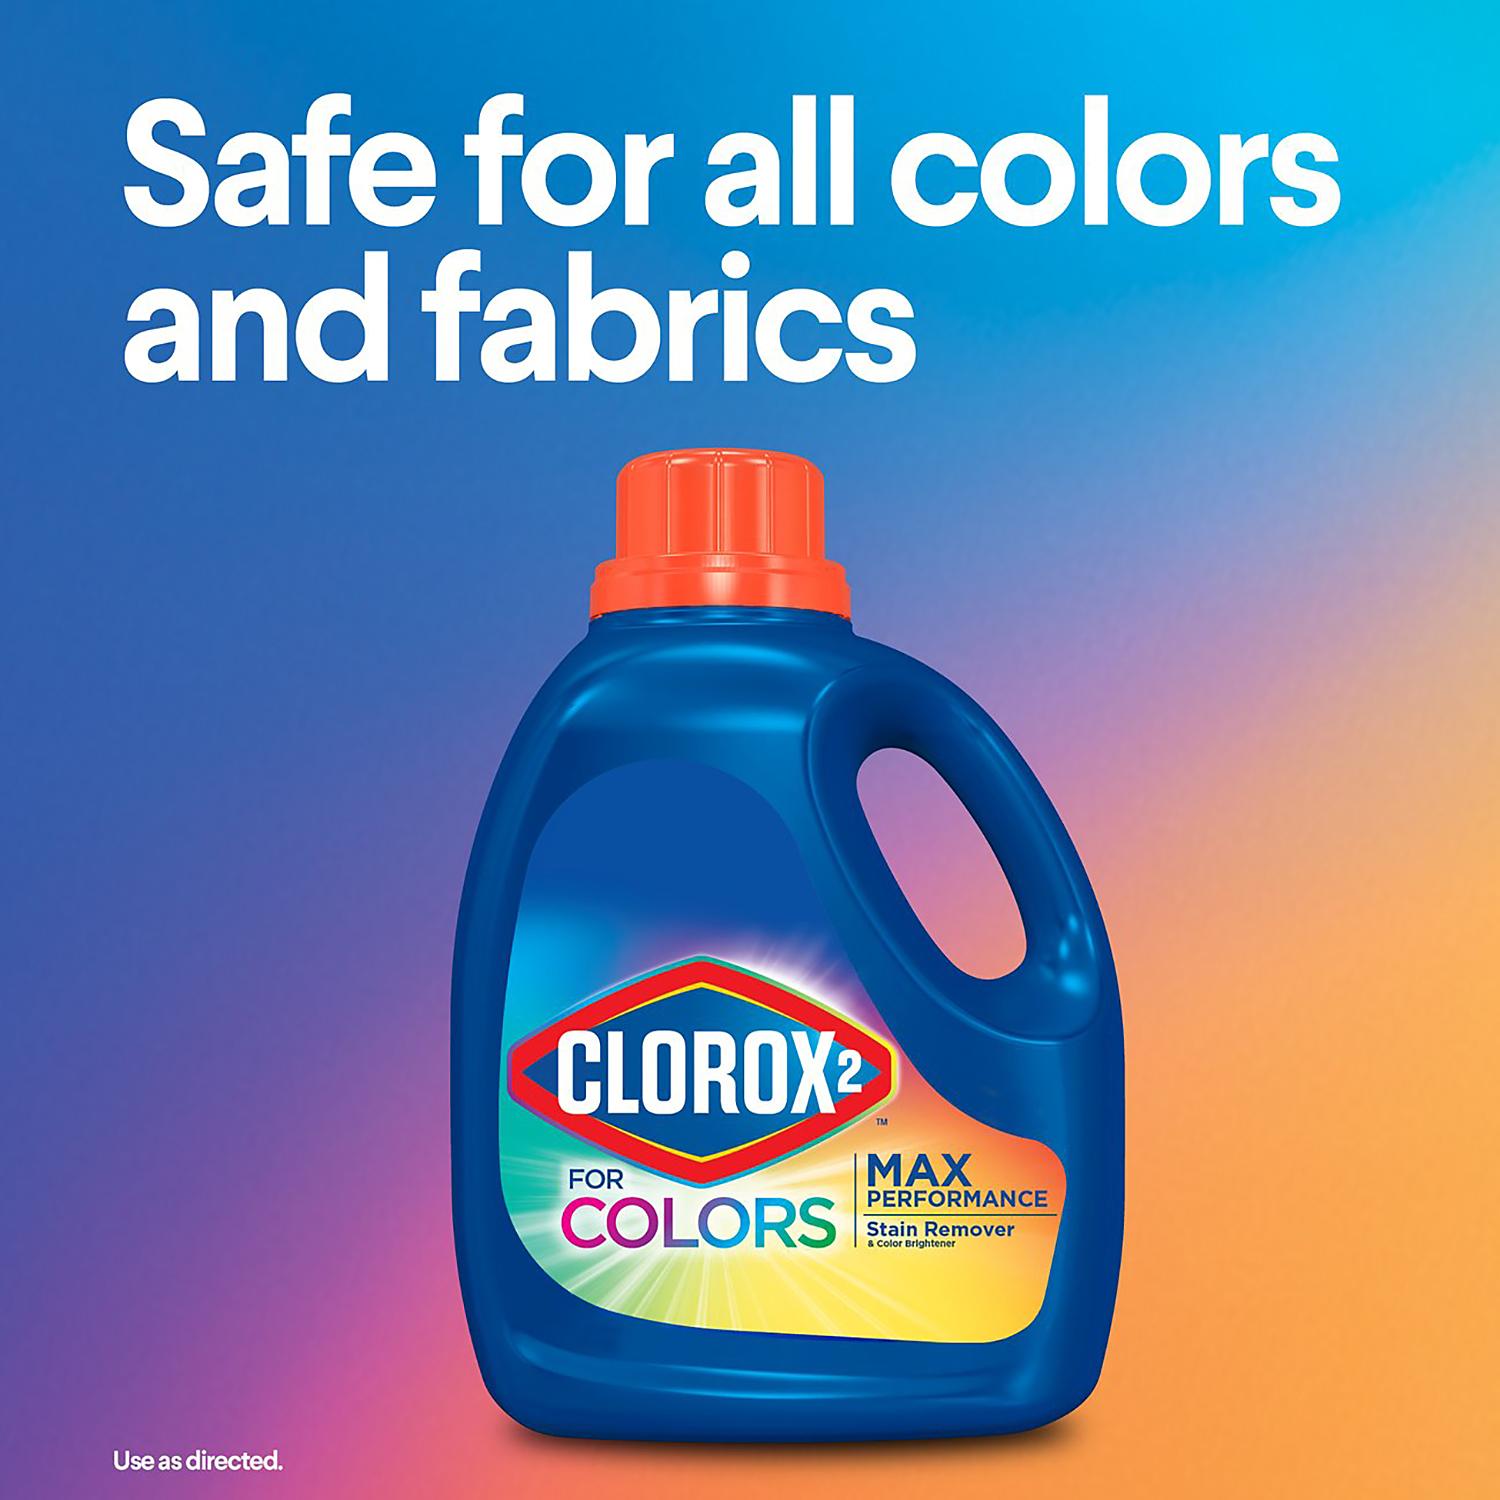 Clorox 2 MaxPerformance, Laundry Stain Remover & Color Booster, 82